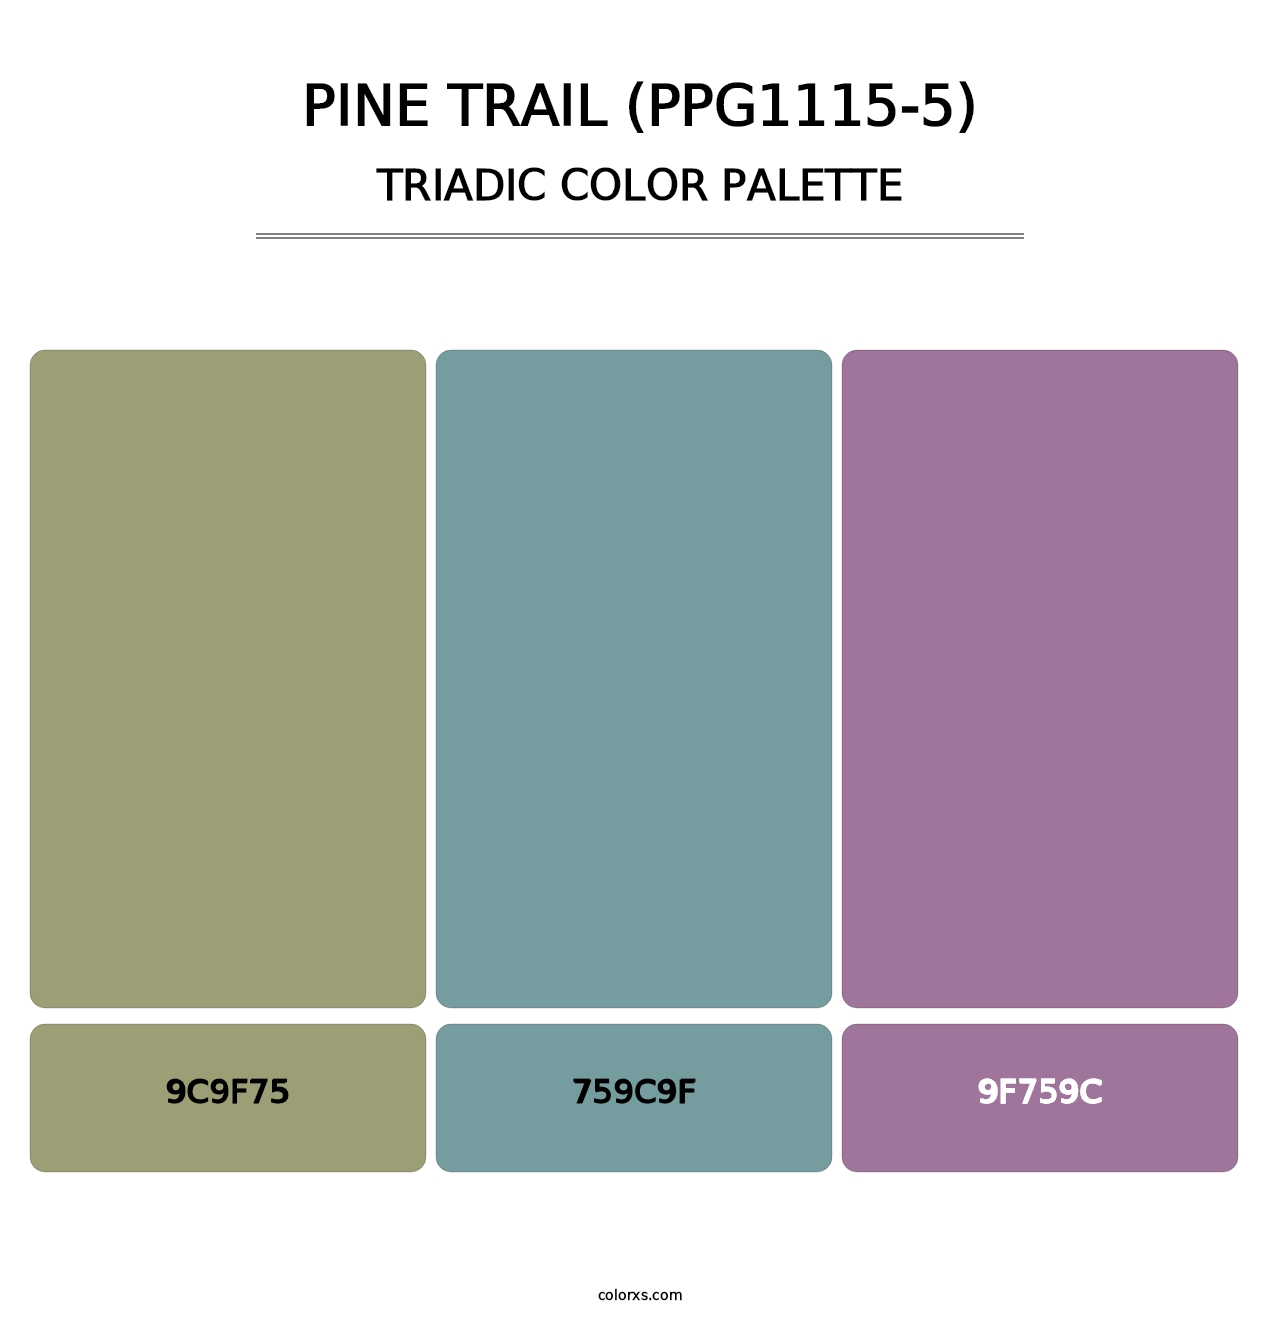 Pine Trail (PPG1115-5) - Triadic Color Palette